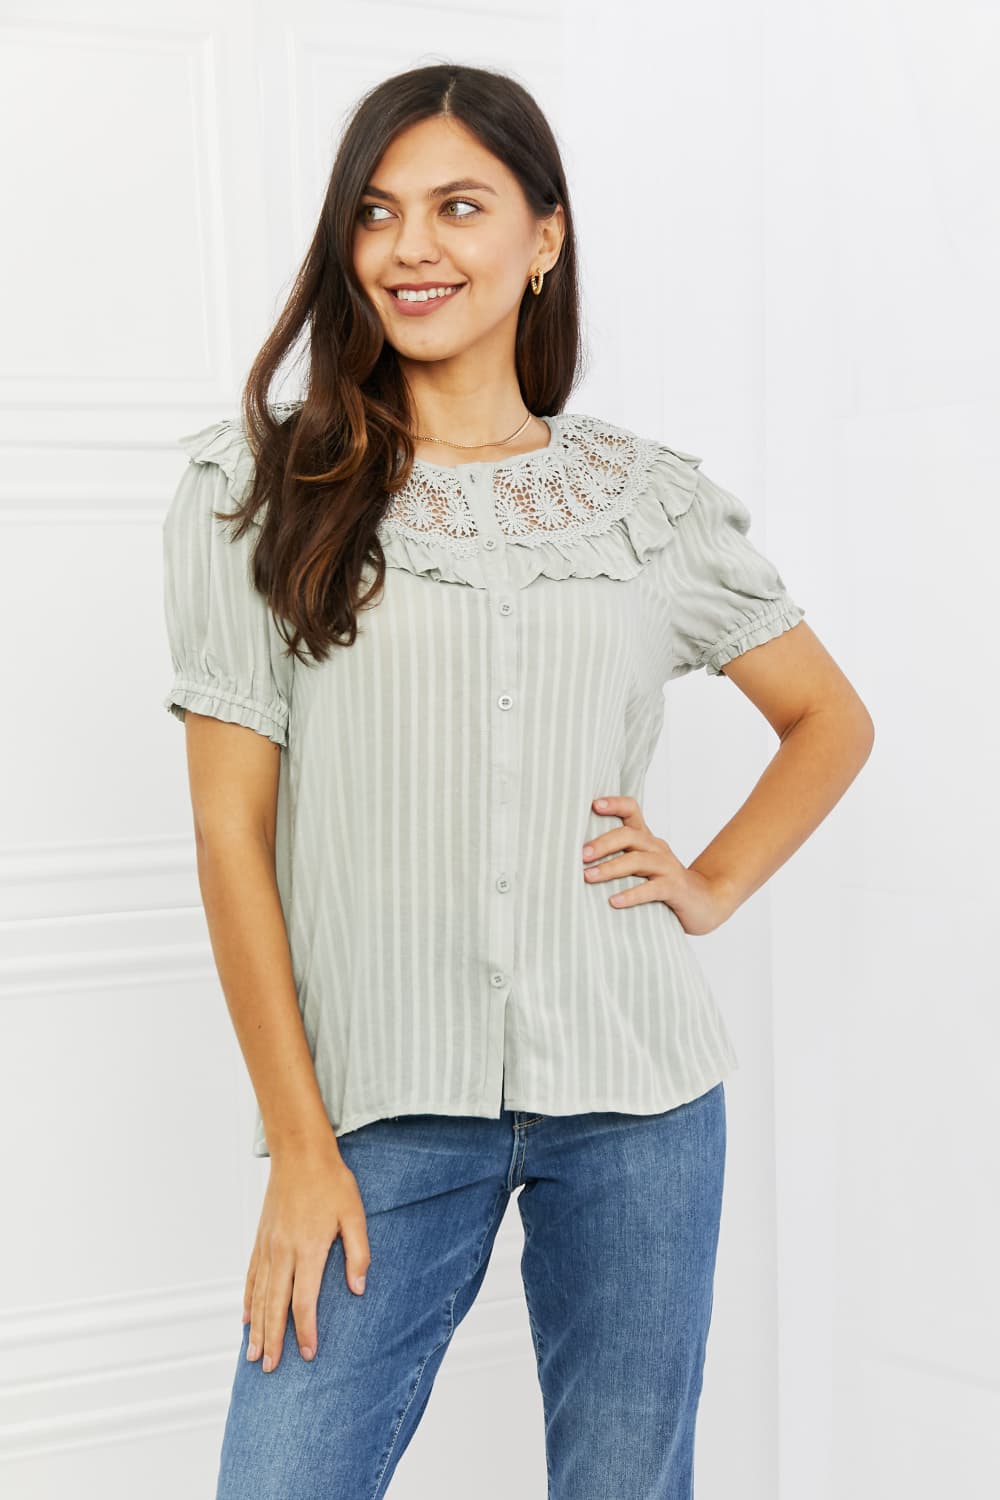 Short Sleeve Top in Ice MintTopHEYSON